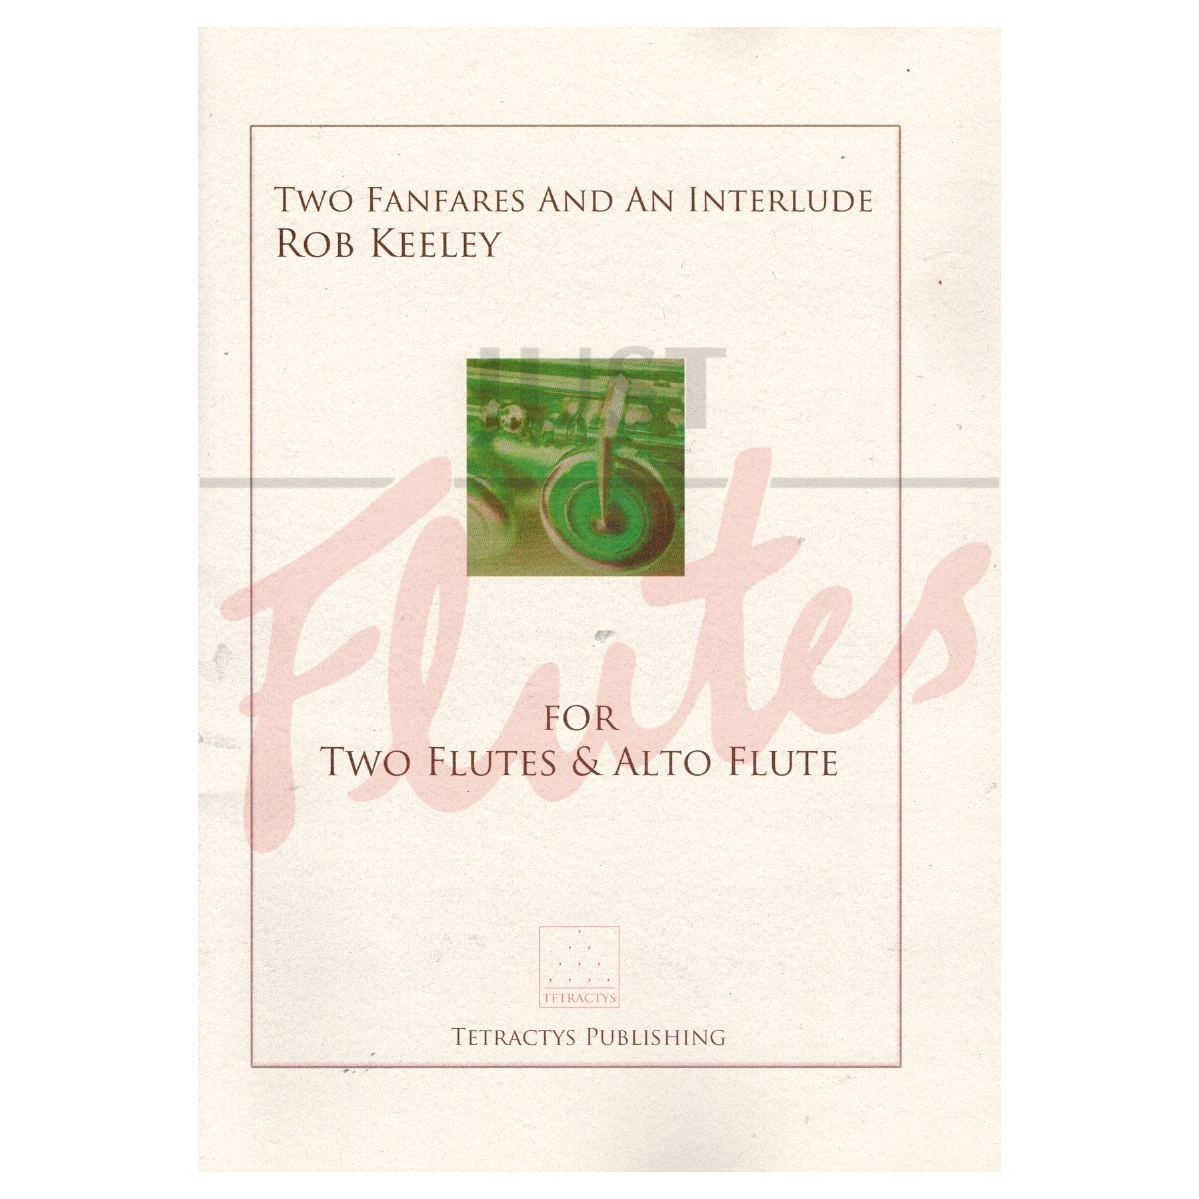 Two Fanfares and an Interlude for Two Flutes and Alto Flute